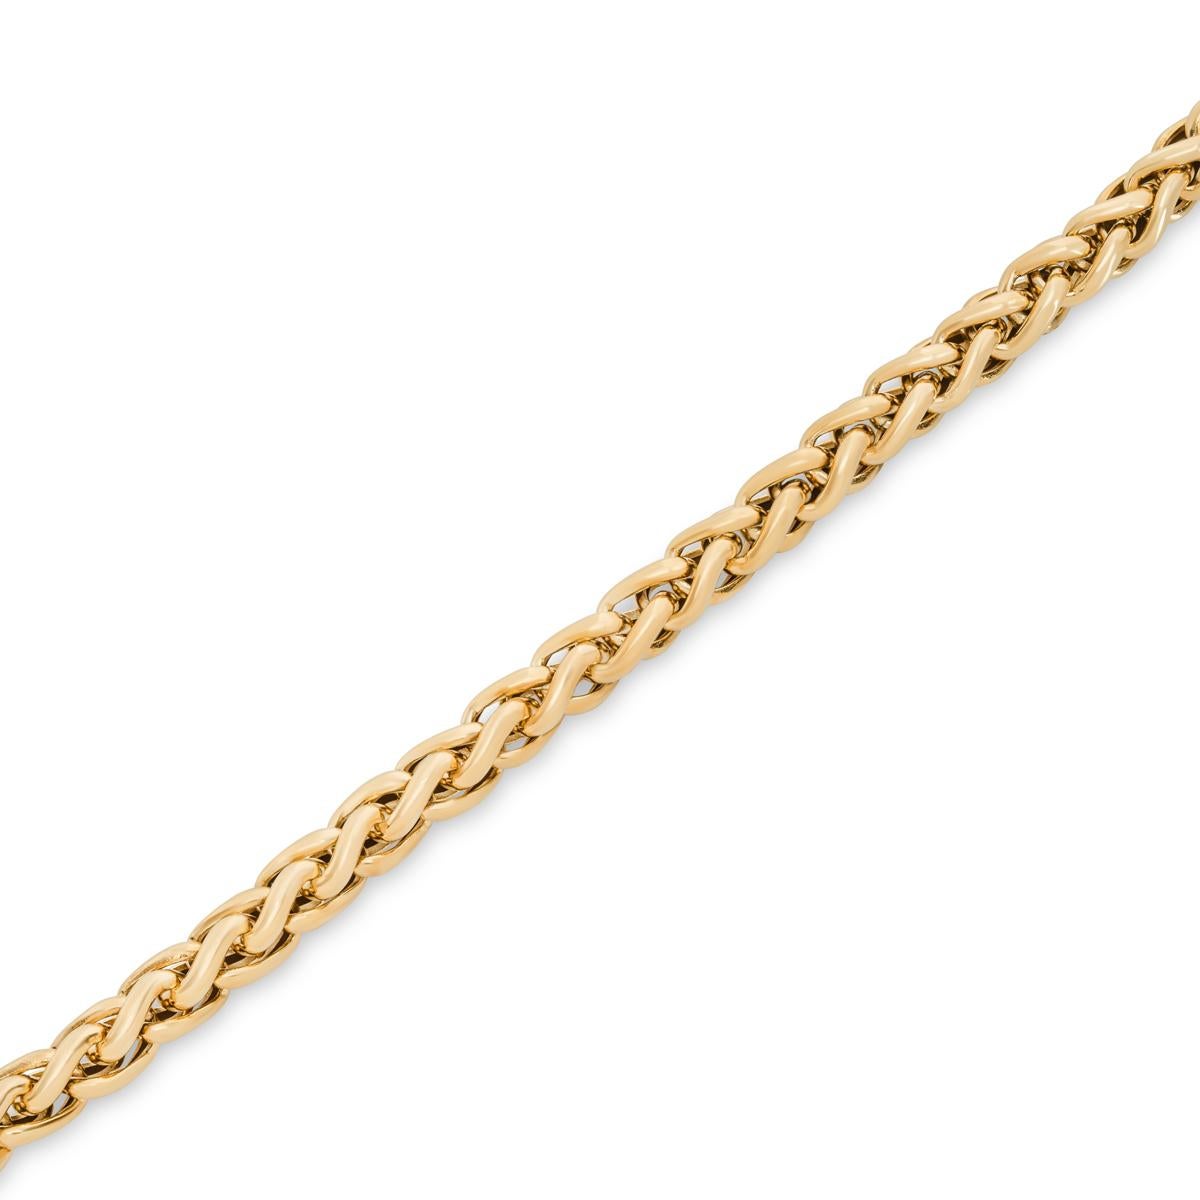 An 18k yellow gold link bracelet. The 7mm wide wheat chain bracelet measures 7.5 inches in length, finishes with a large lobster clasp and has a gross weight of 24.55 grams.

Comes complete with a RichDiamonds presentation box and our own